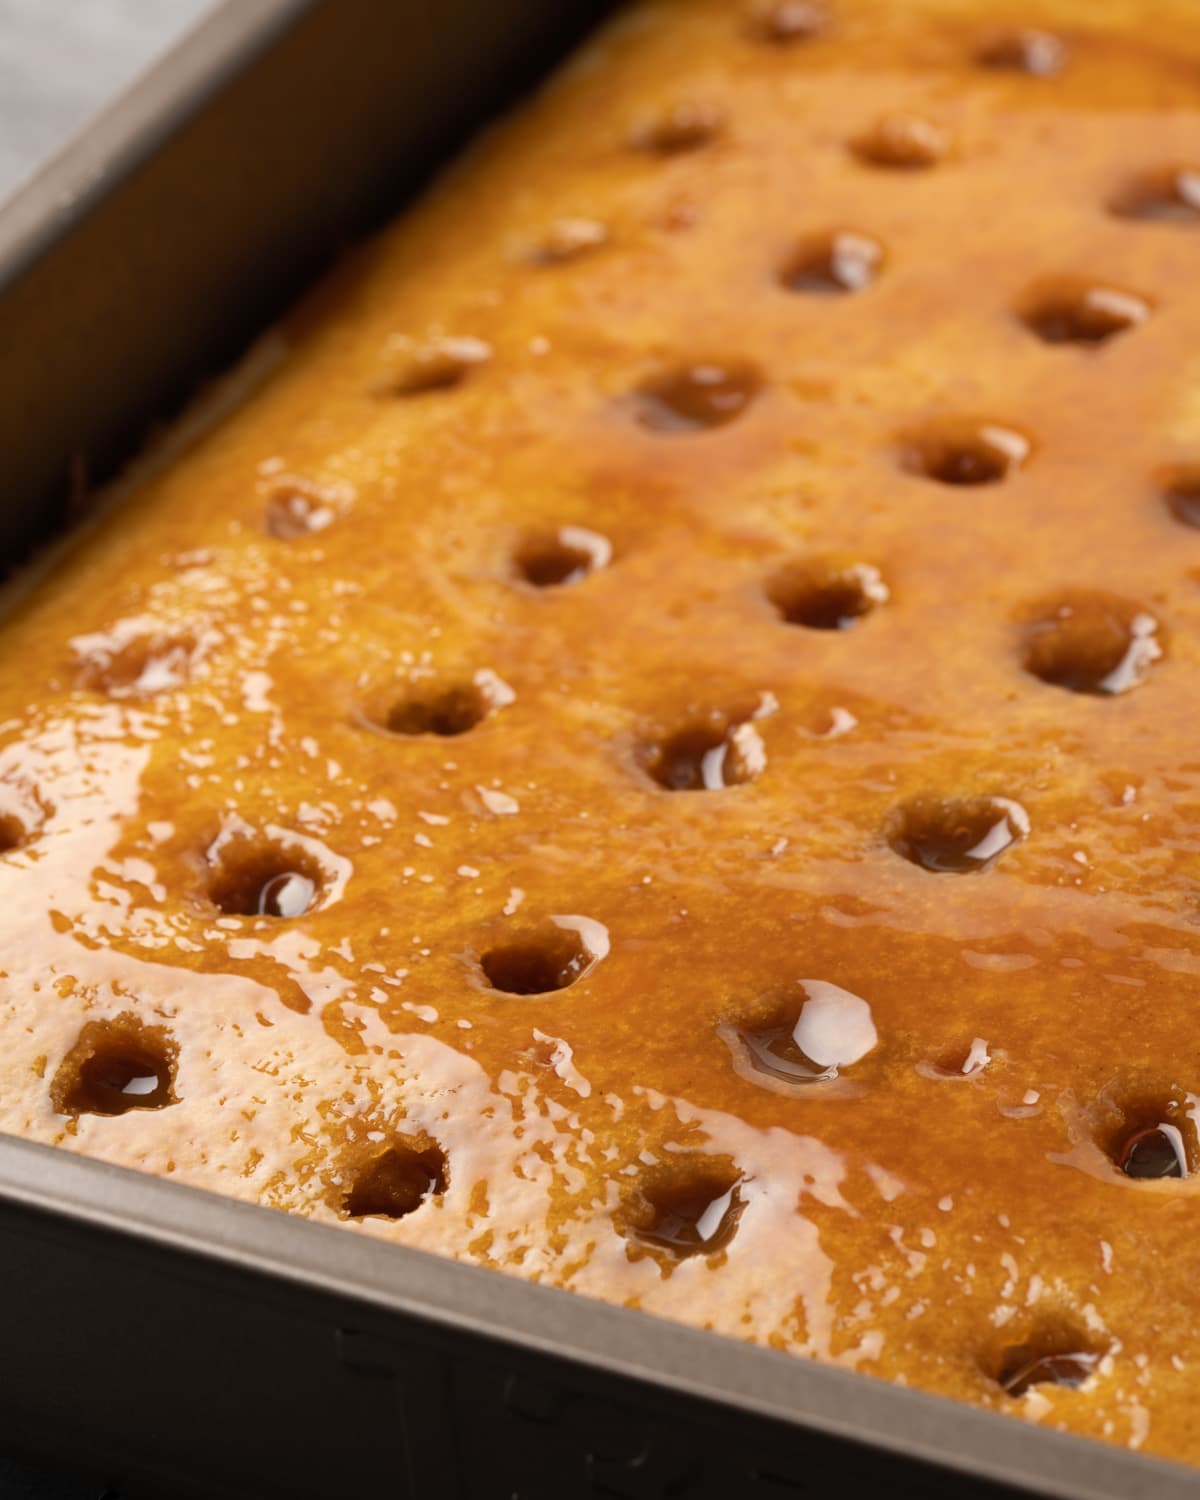 Vanilla cake in a pan, with holes poked in the surface, covered in a layer of caramel sauce.